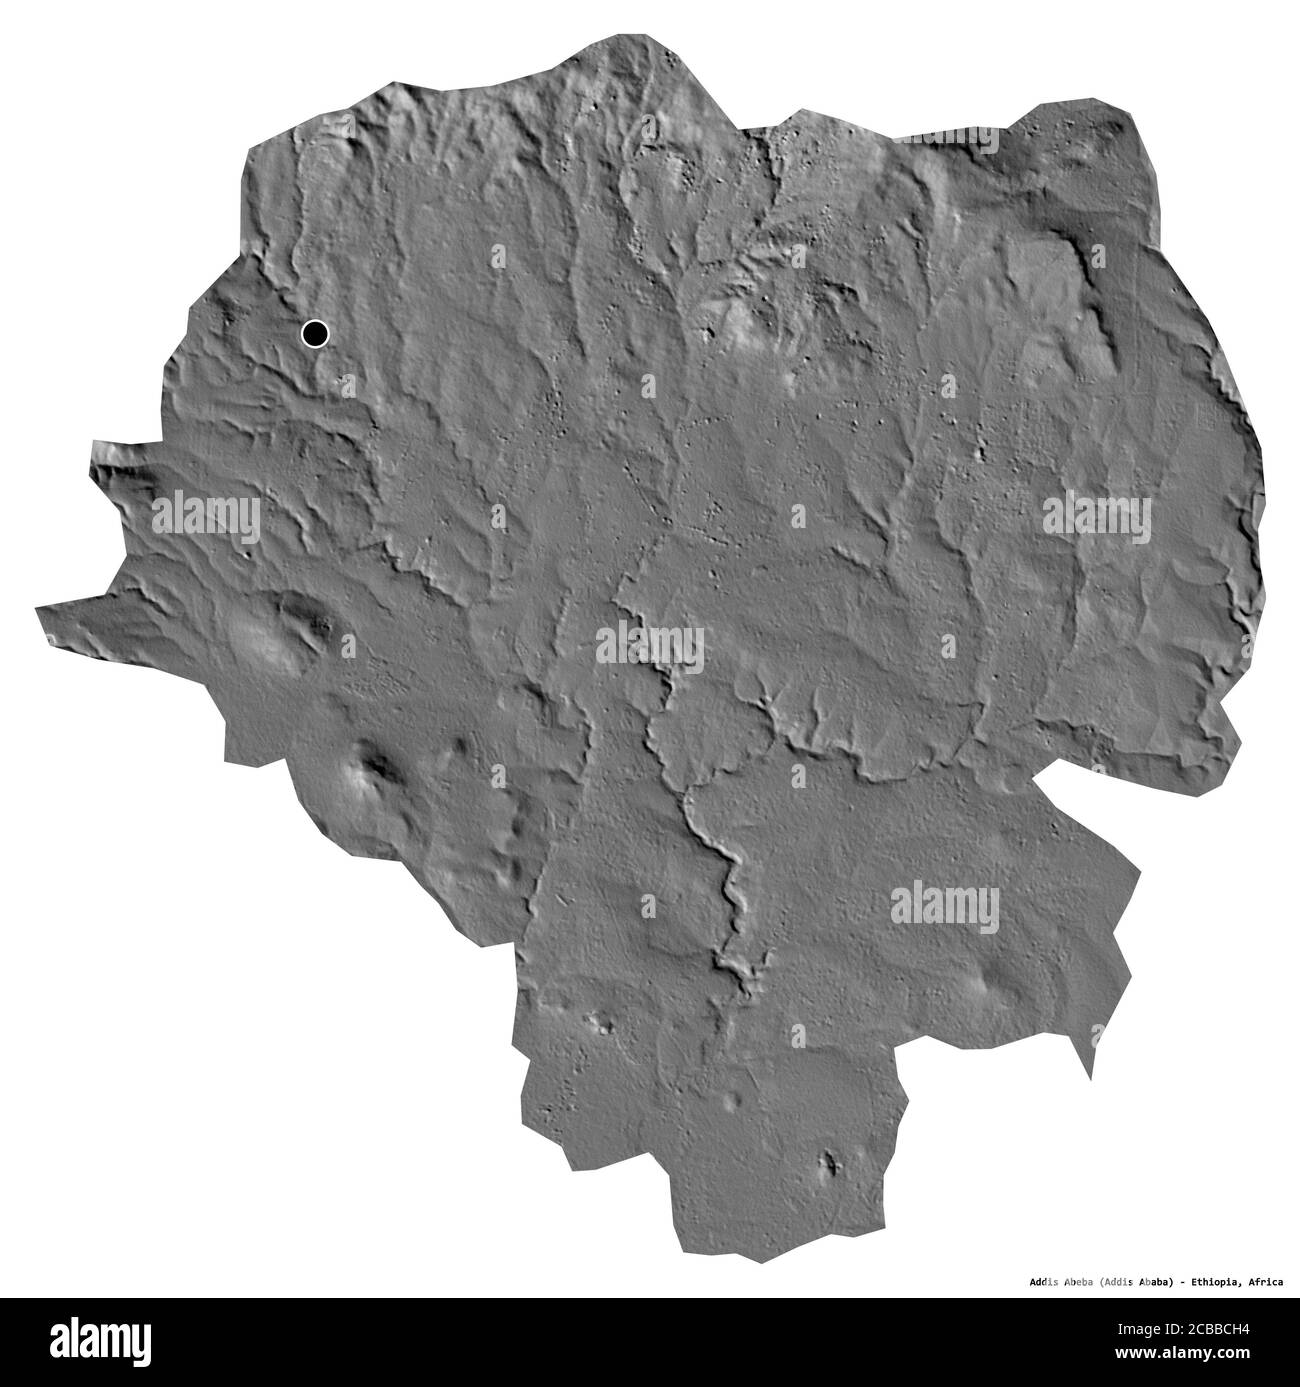 https://c8.alamy.com/comp/2CBBCH4/shape-of-addis-abeba-city-of-ethiopia-with-its-capital-isolated-on-white-background-bilevel-elevation-map-3d-rendering-2CBBCH4.jpg